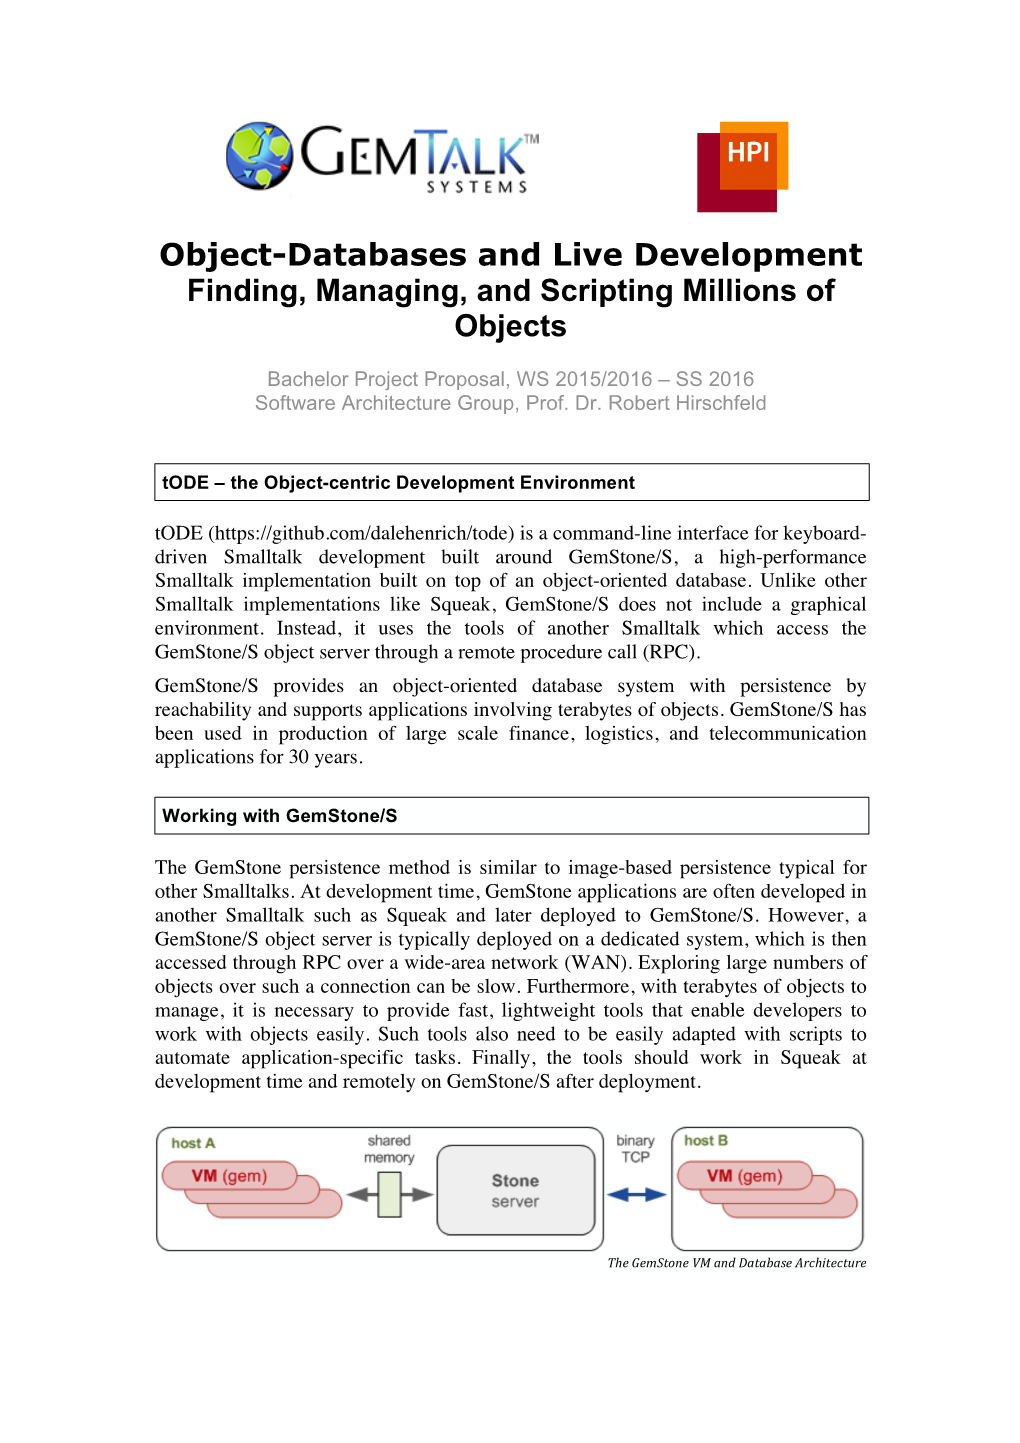 Object-Databases and Live Development Finding, Managing, and Scripting Millions of Objects